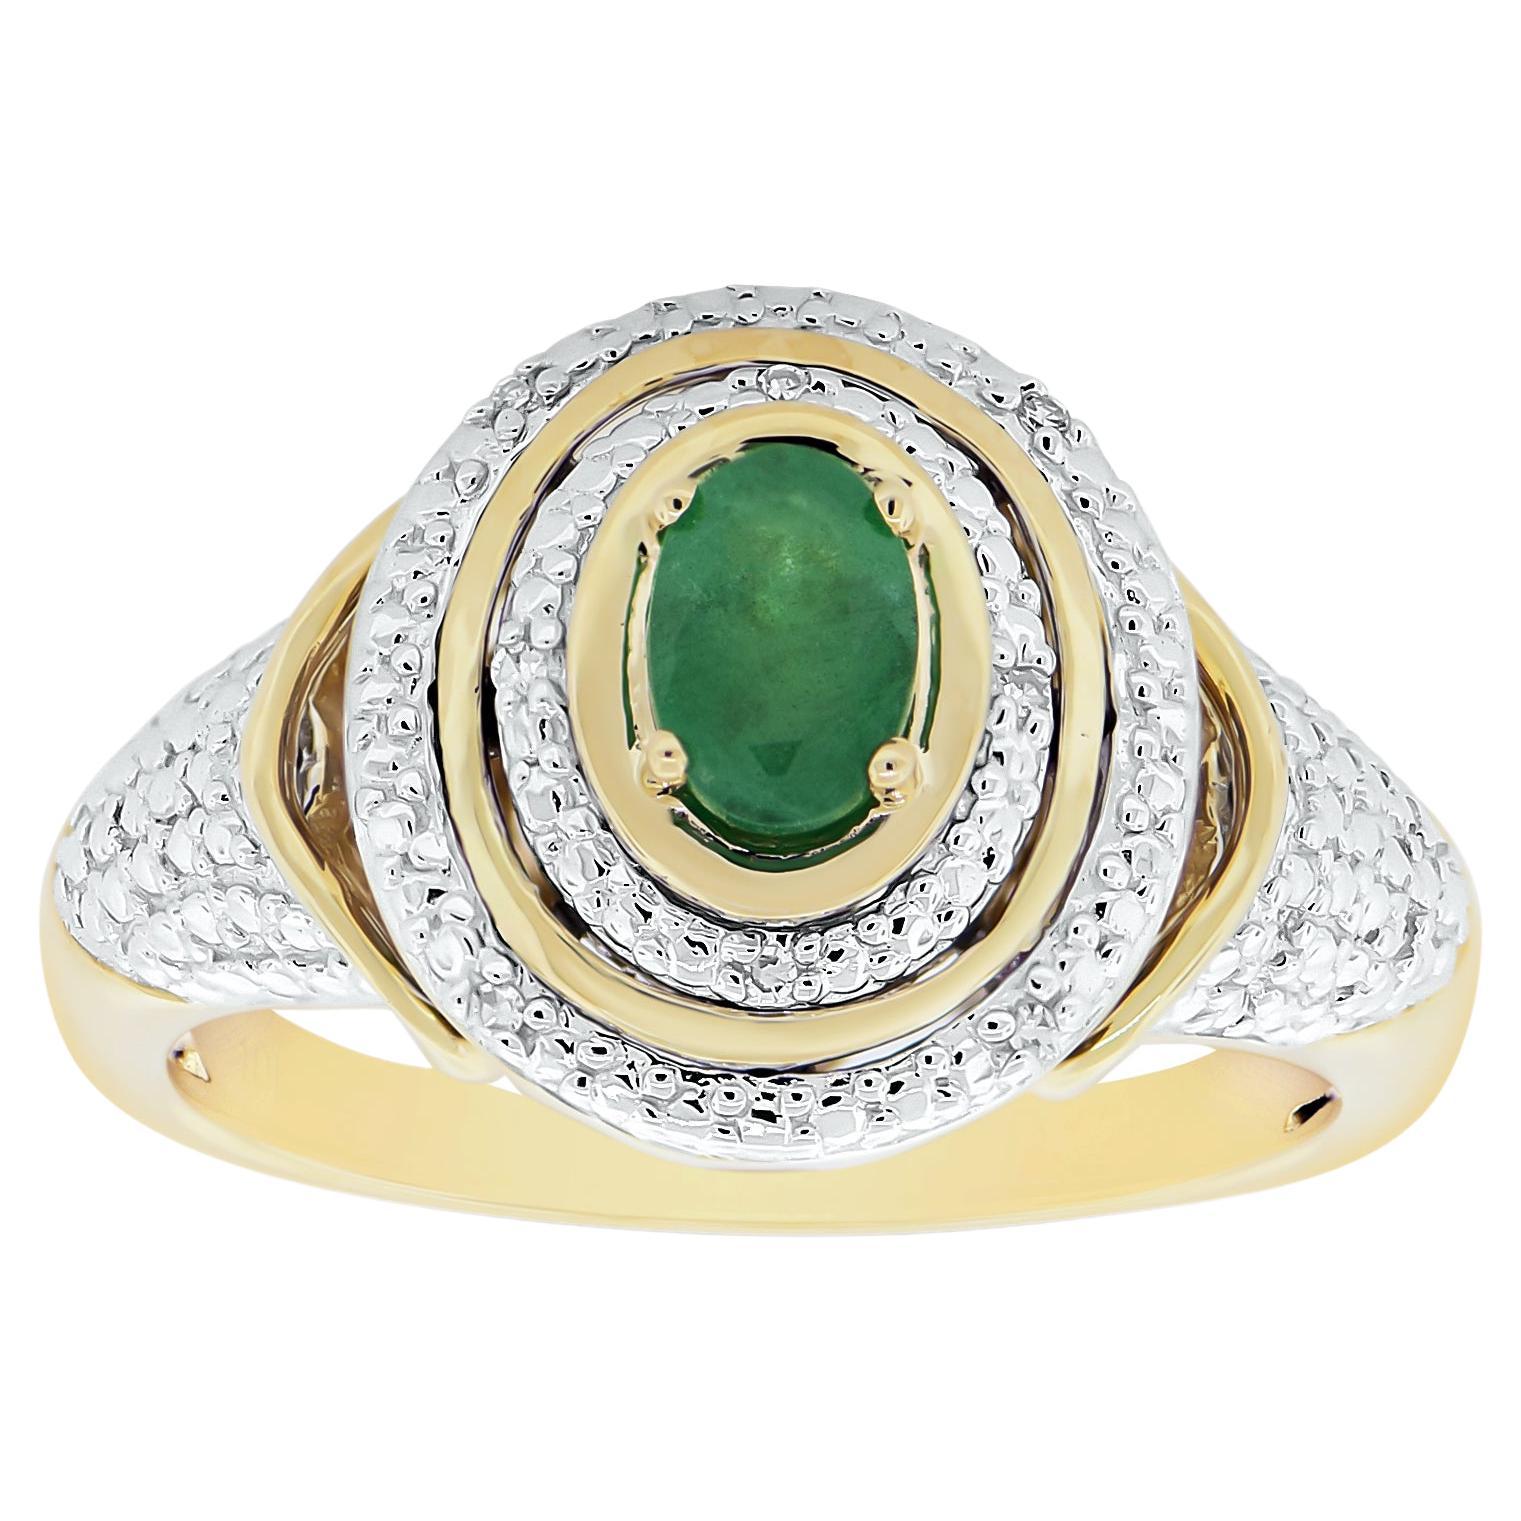 10K Yellow Gold Emerald and Diamond Cocktail Ring